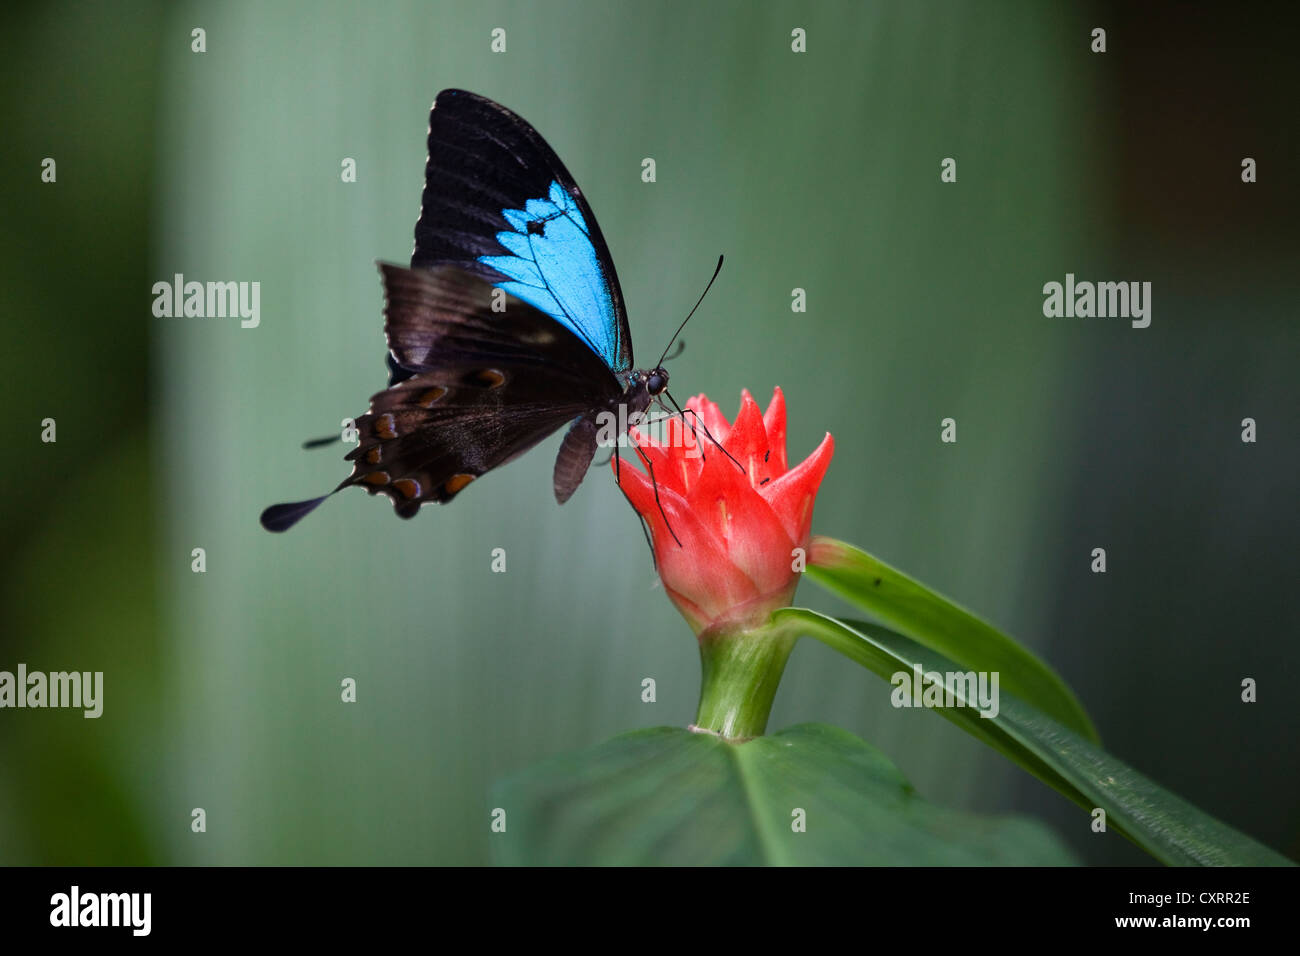 Ulysses Butterfly High Resolution Stock Photography and Images   Alamy